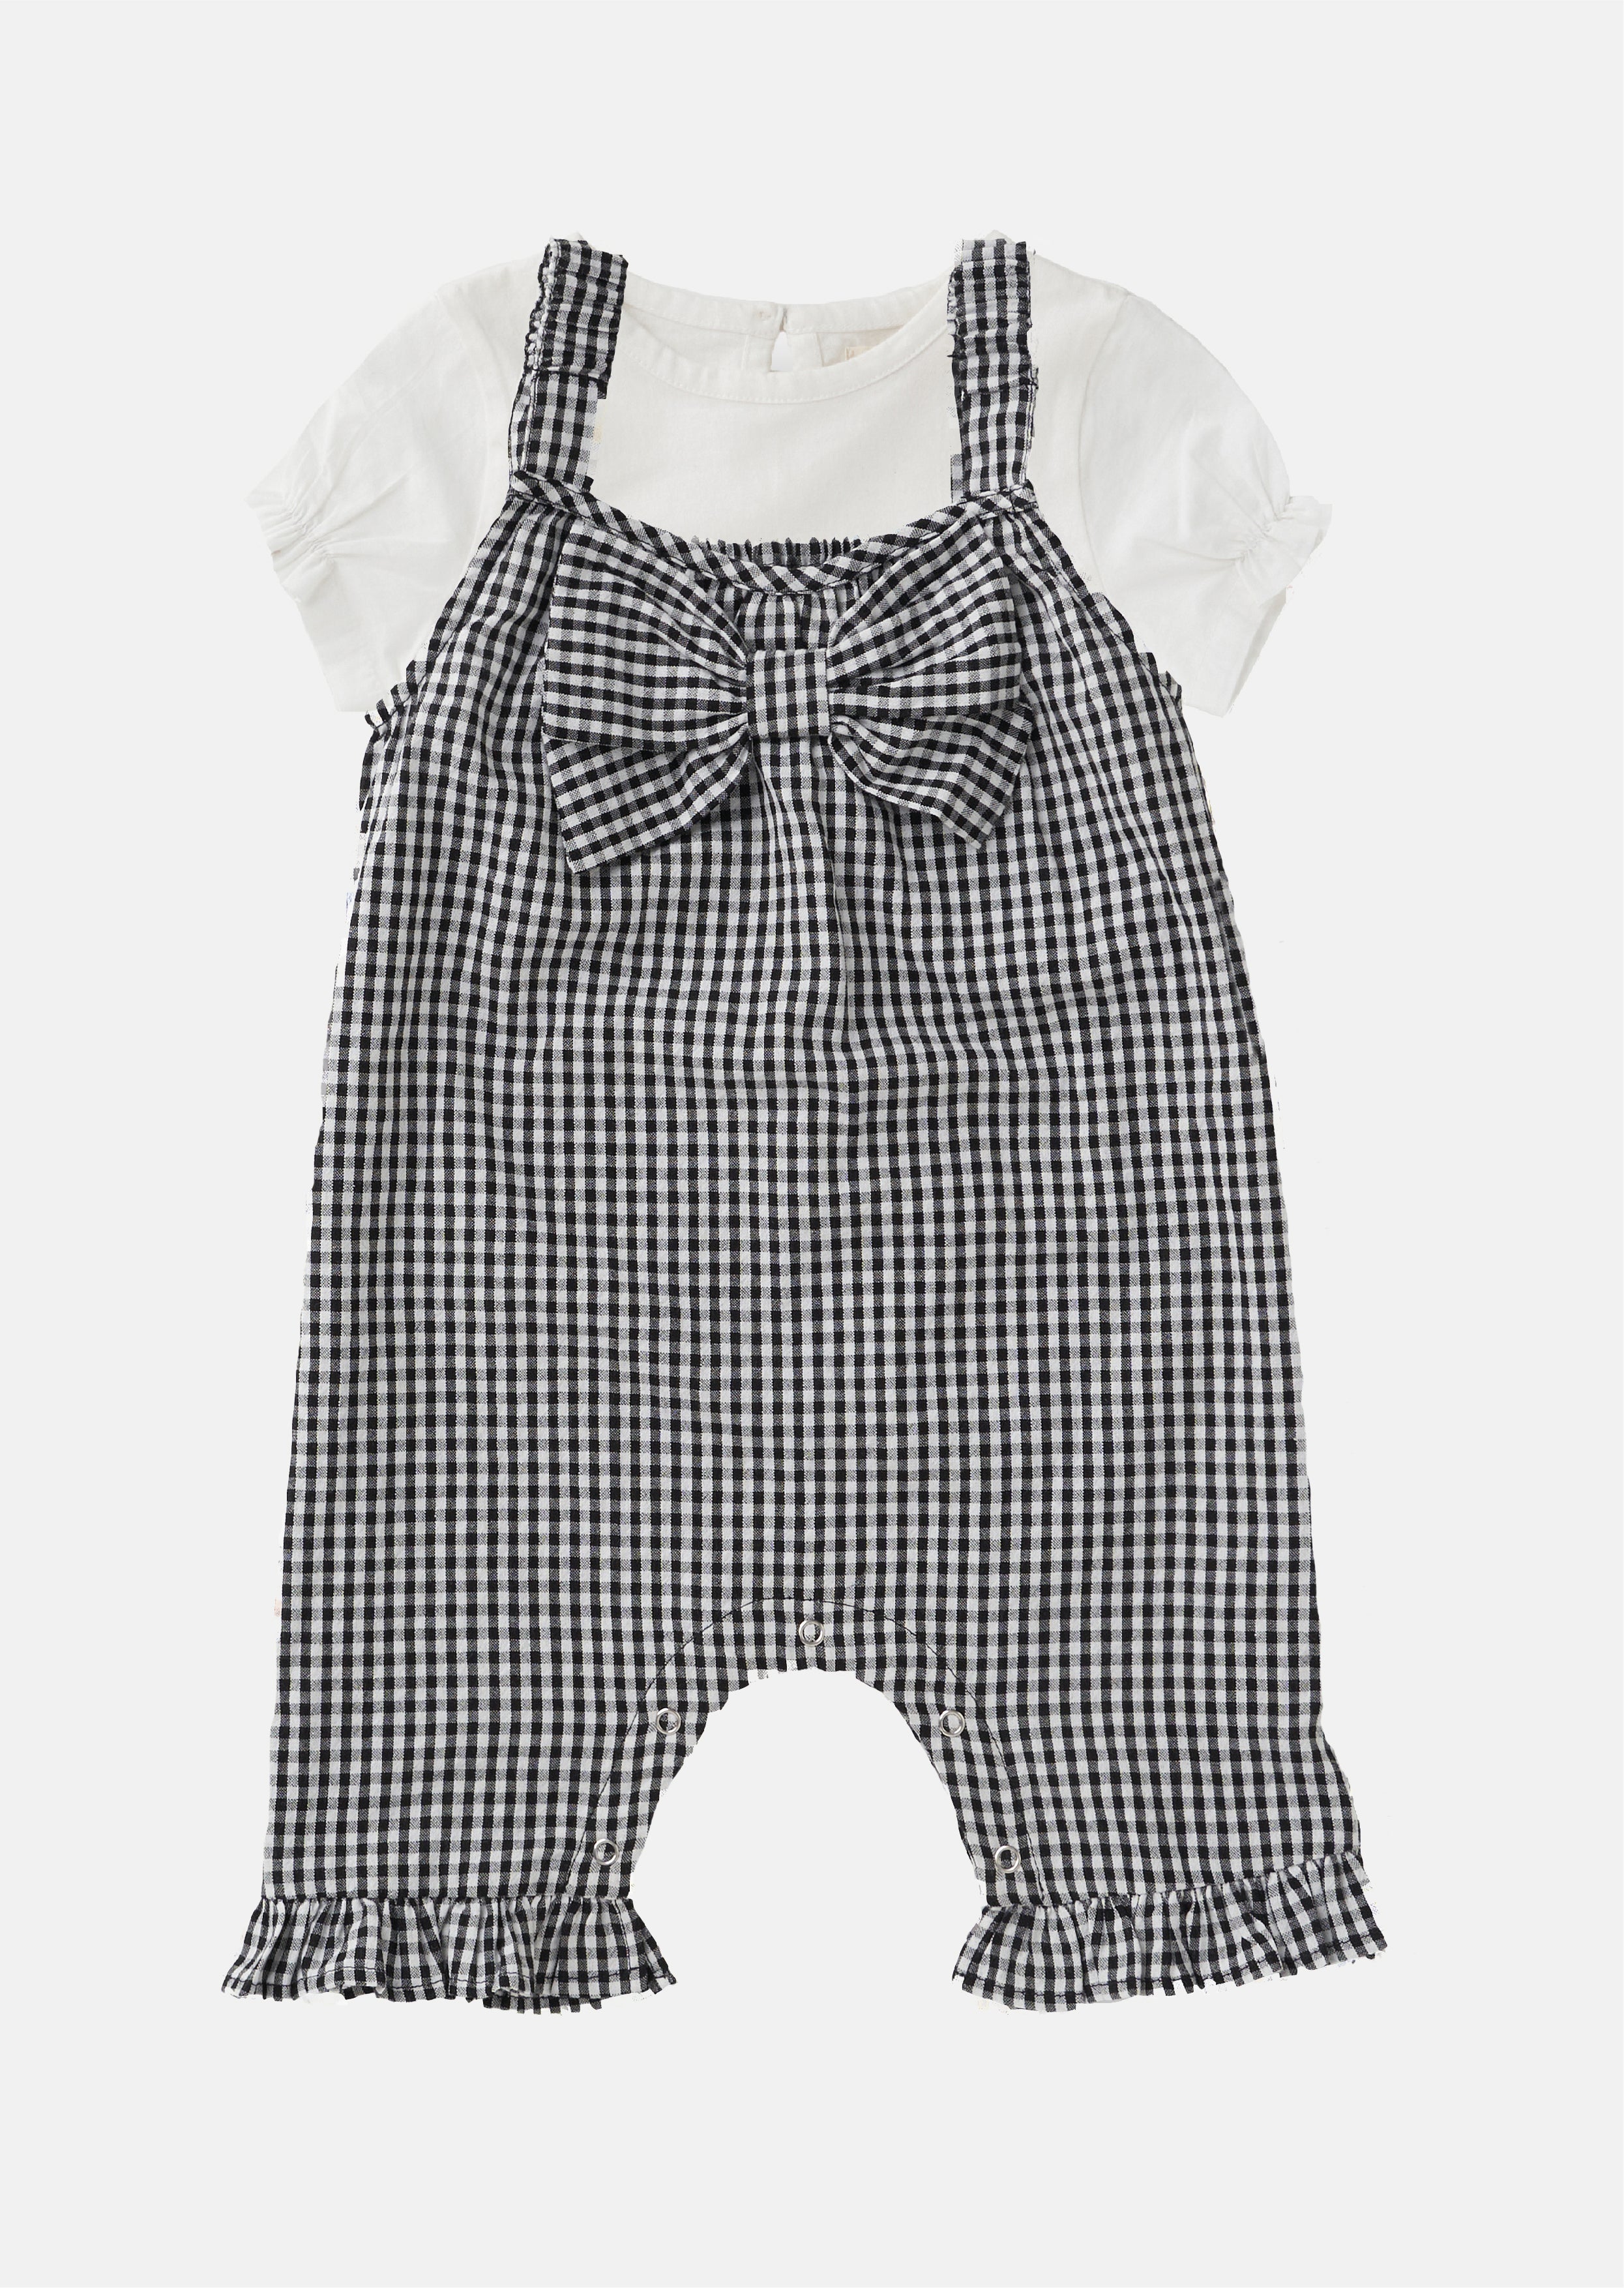 Baby Girl Black and White Checked Cotton Playsuit